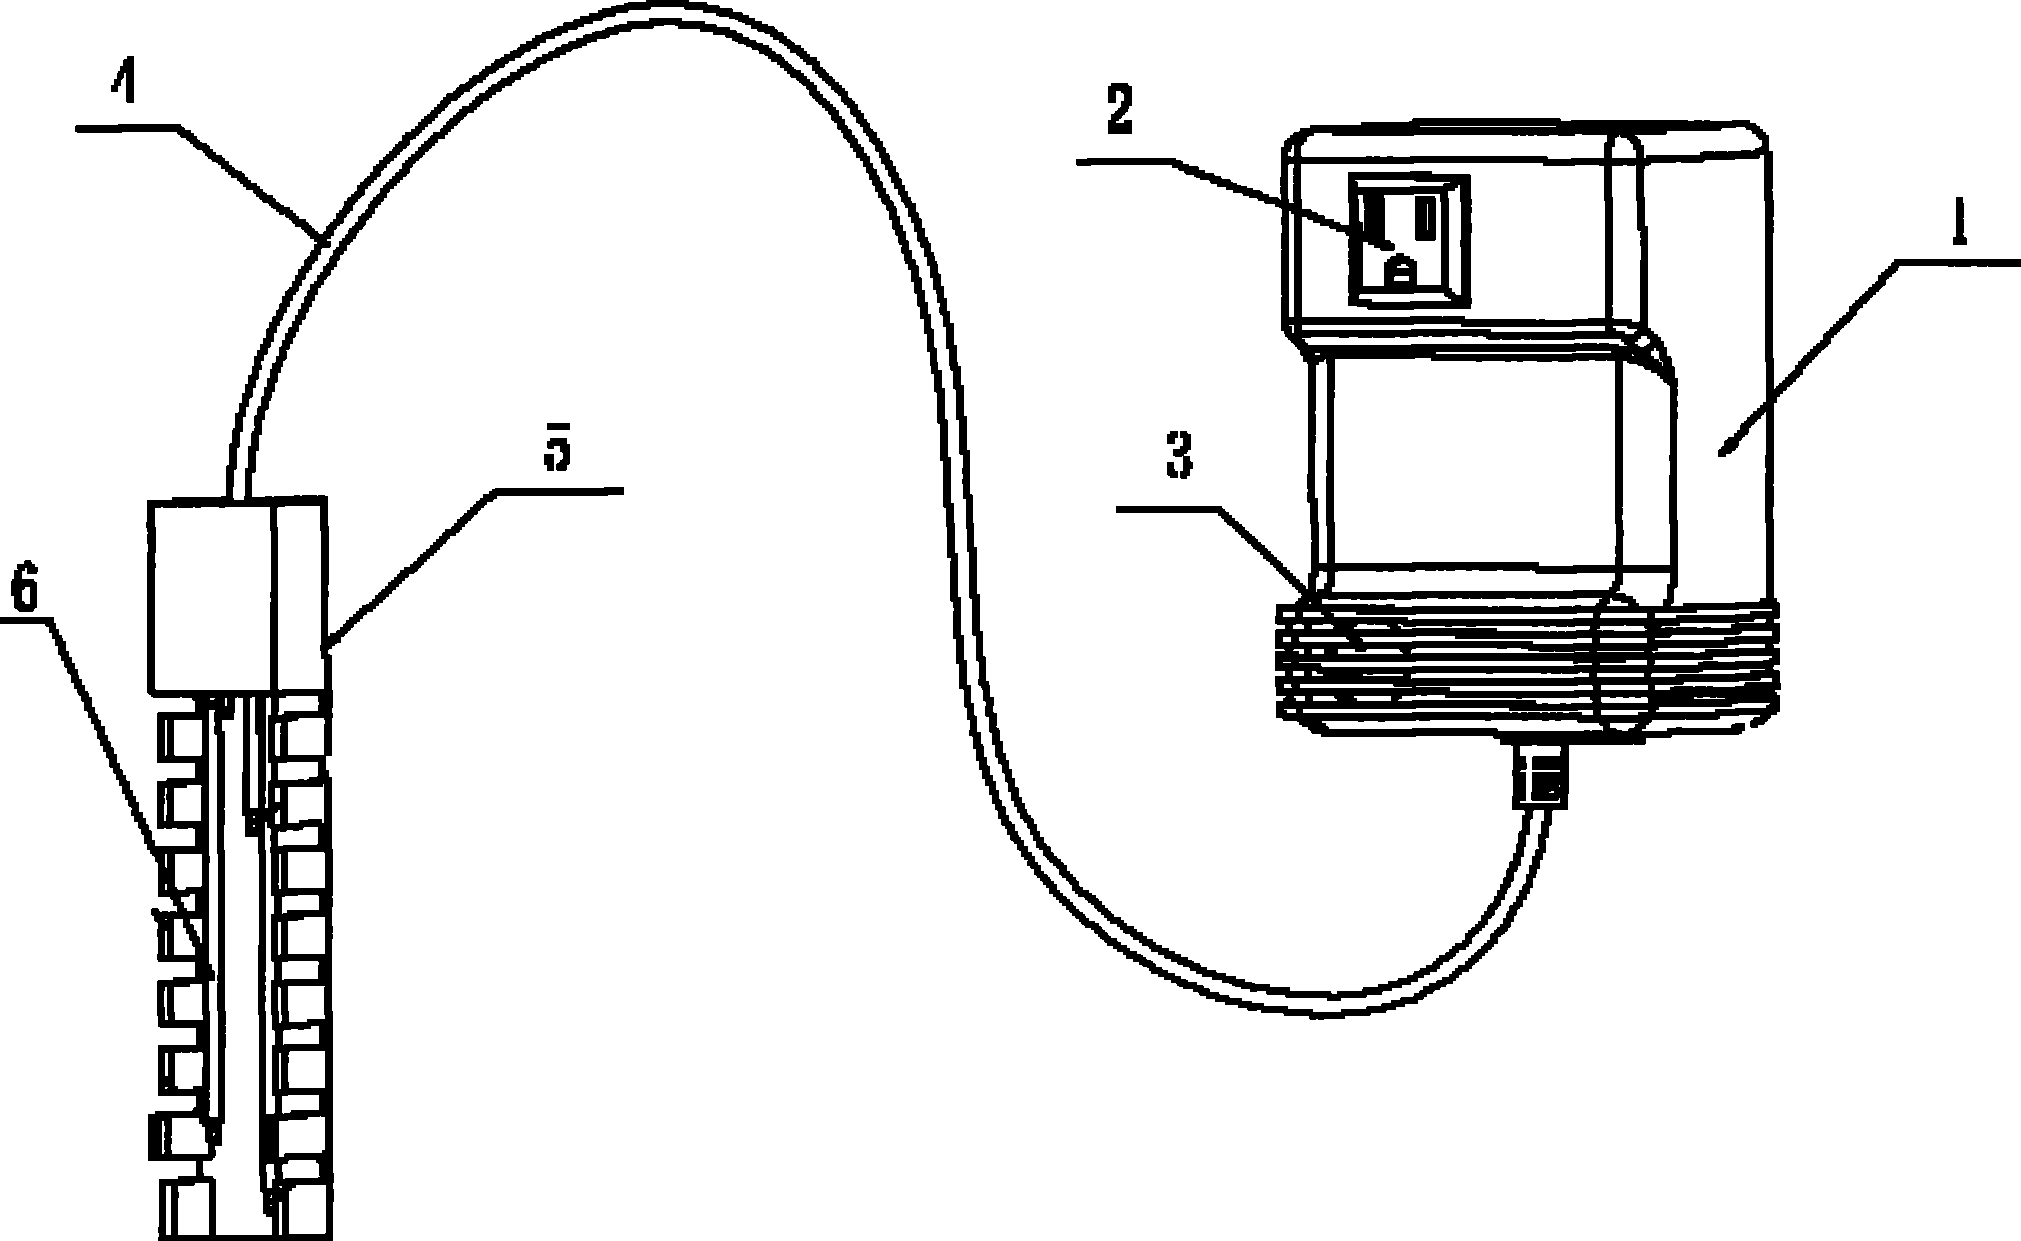 Split structure of probe and switch box